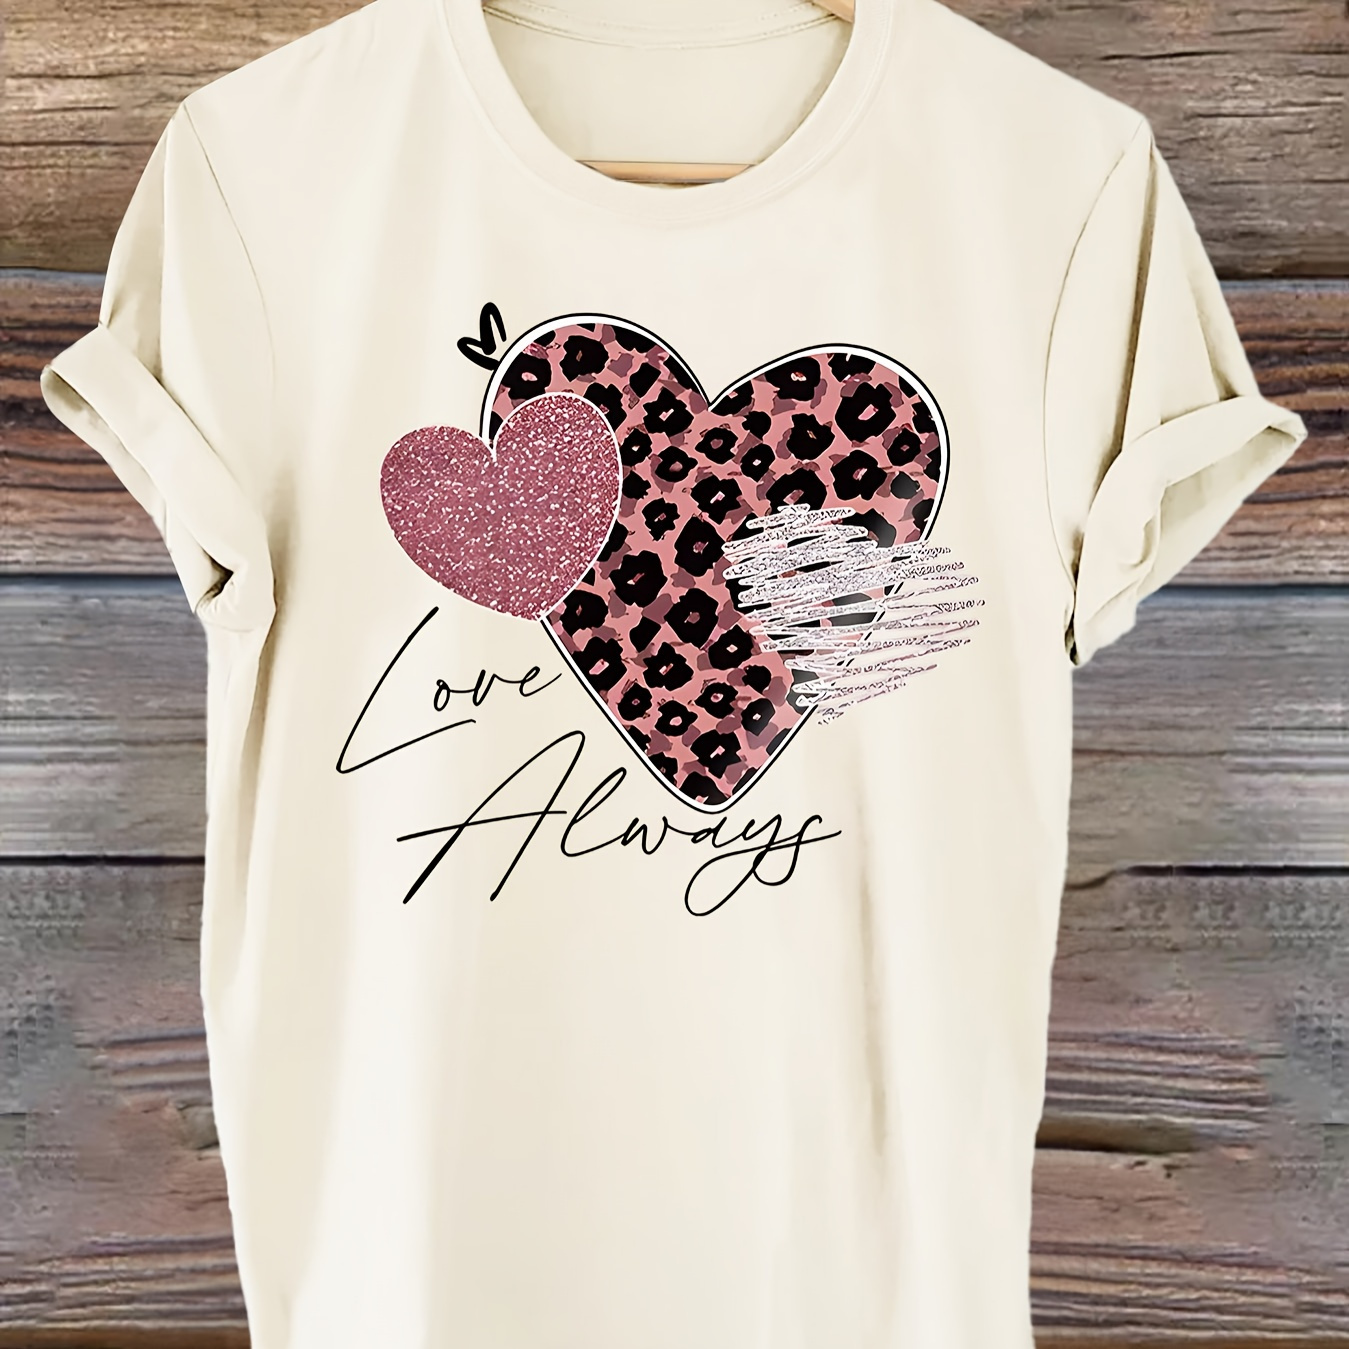 

Heart Print T-shirt, Short Sleeve Crew Neck Casual Top For Summer & Spring, Women's Clothing